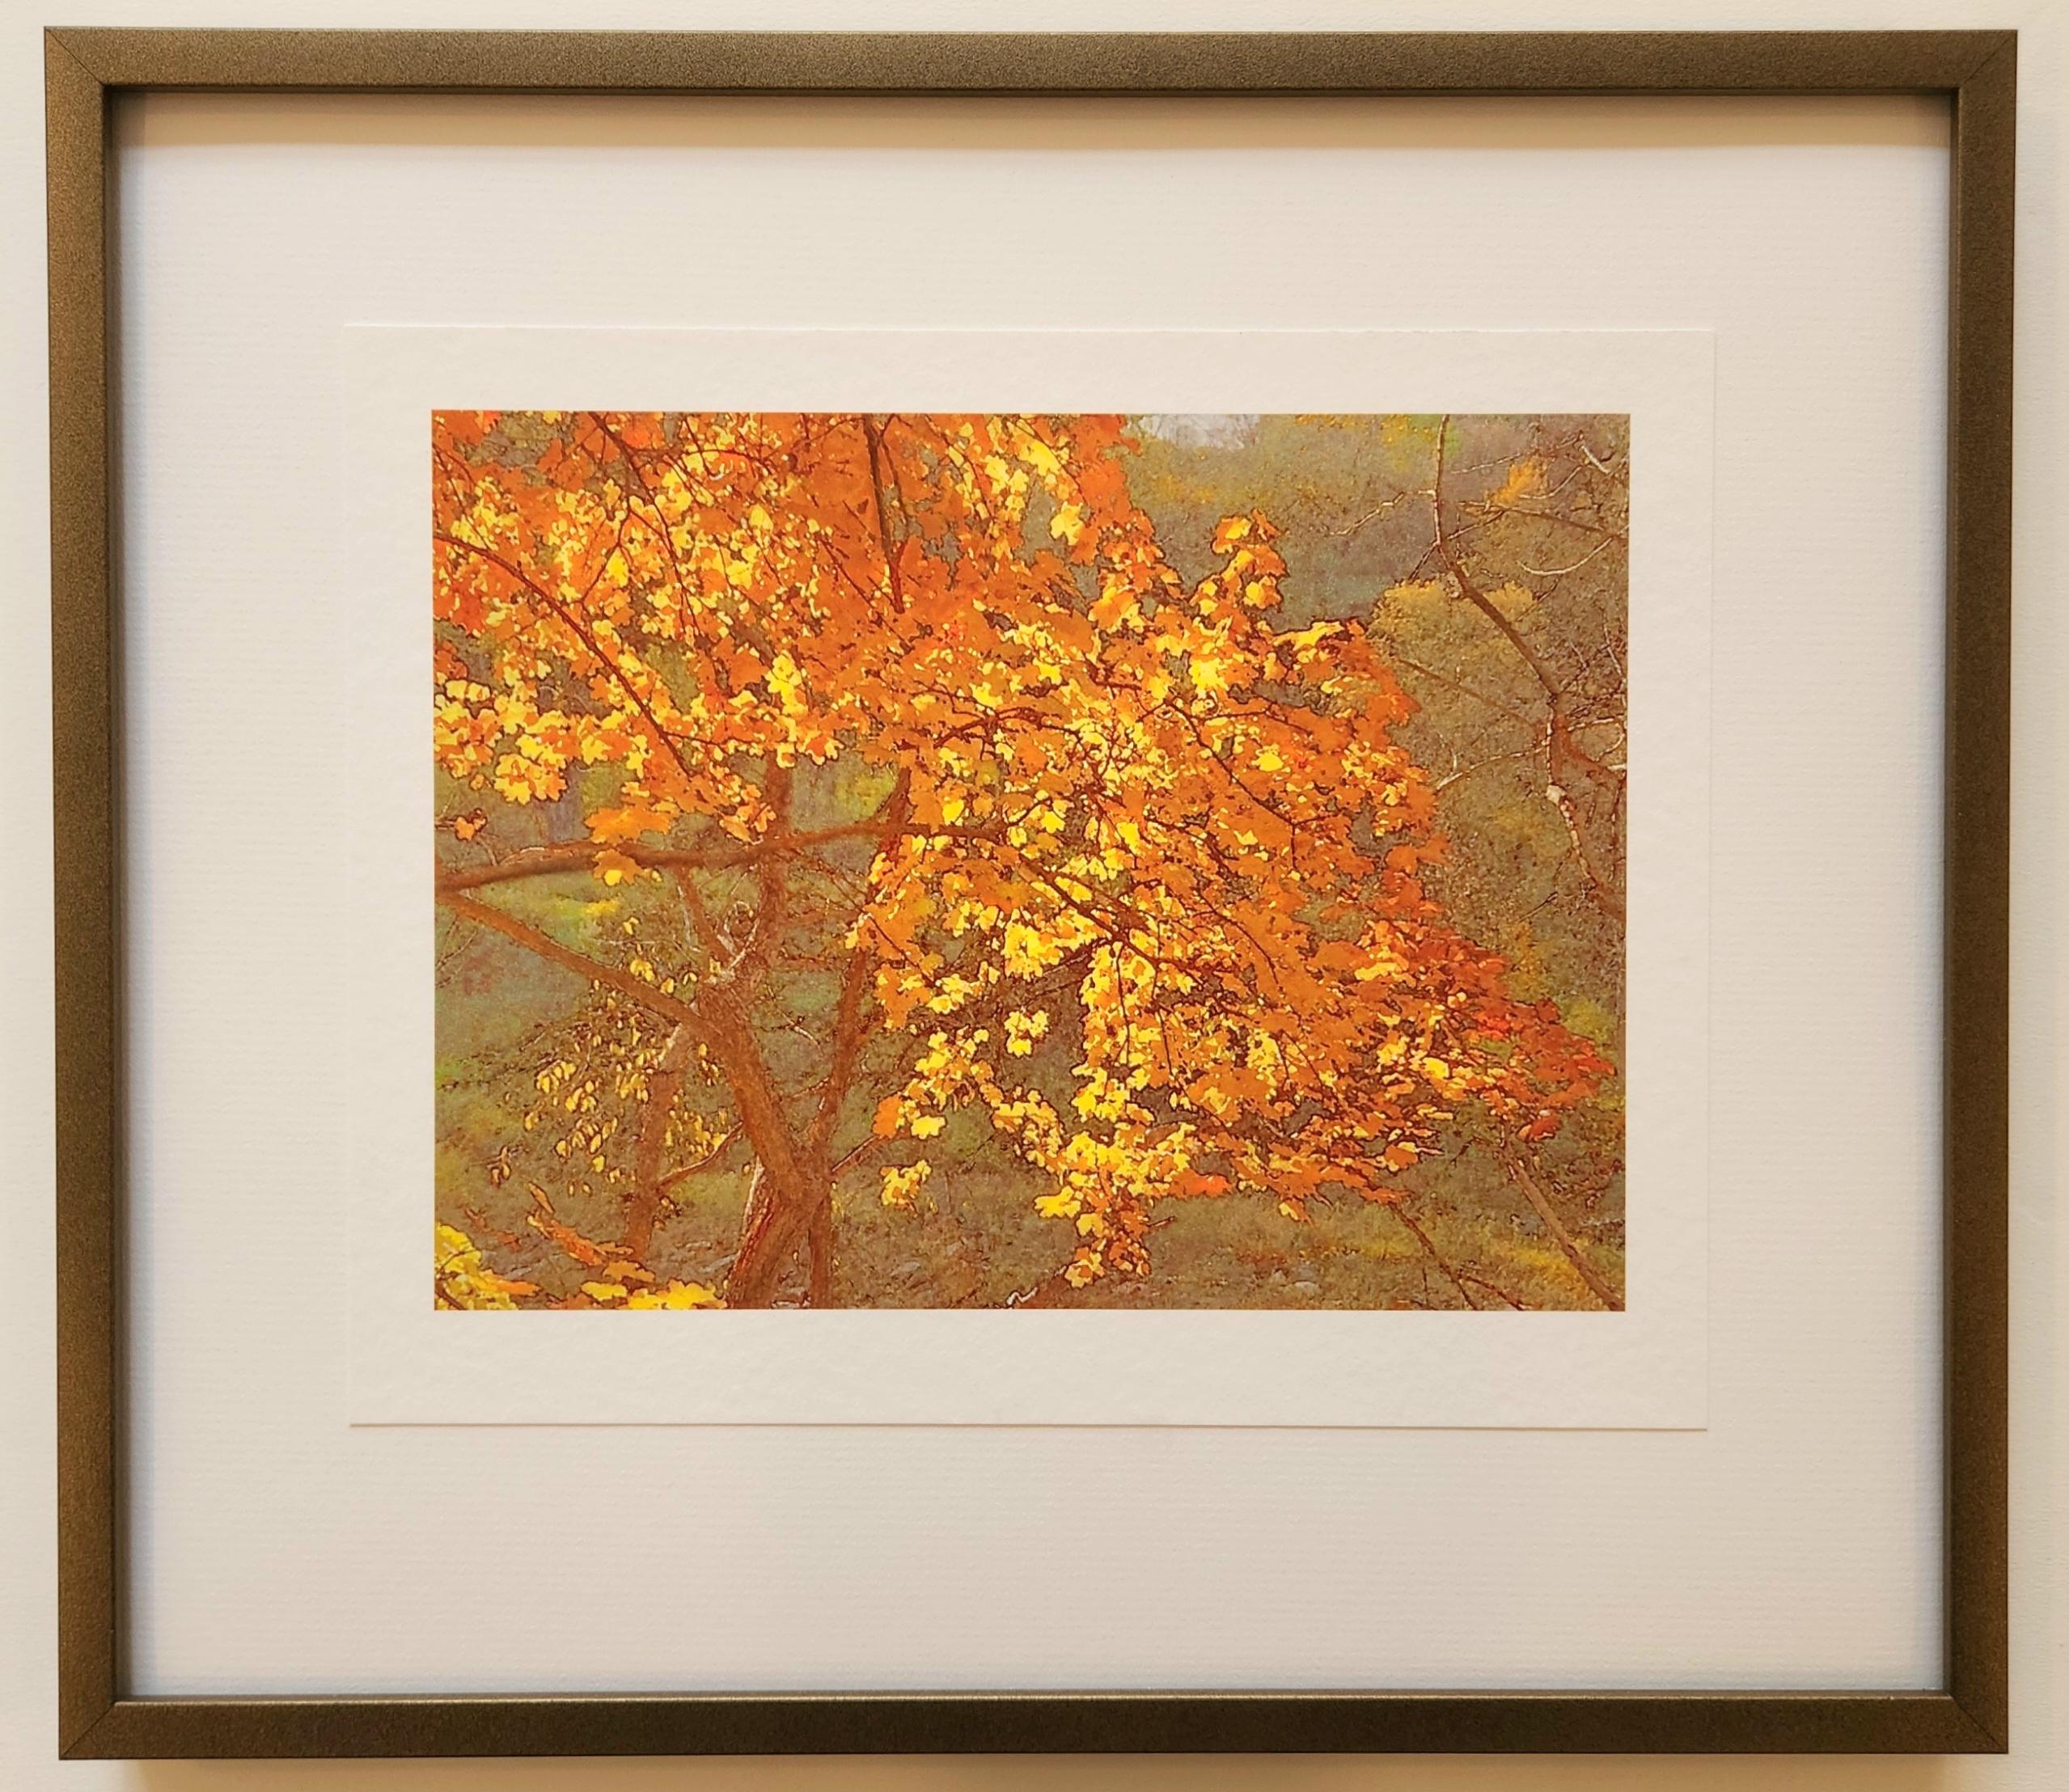 This photo of the leaves of a tree in autumn shows the beauty of changing leaves. The bright oranges and yellows of the leaves in the foreground stand out from the muted green foliage in the background. This photo evokes the peaceful feeling of a